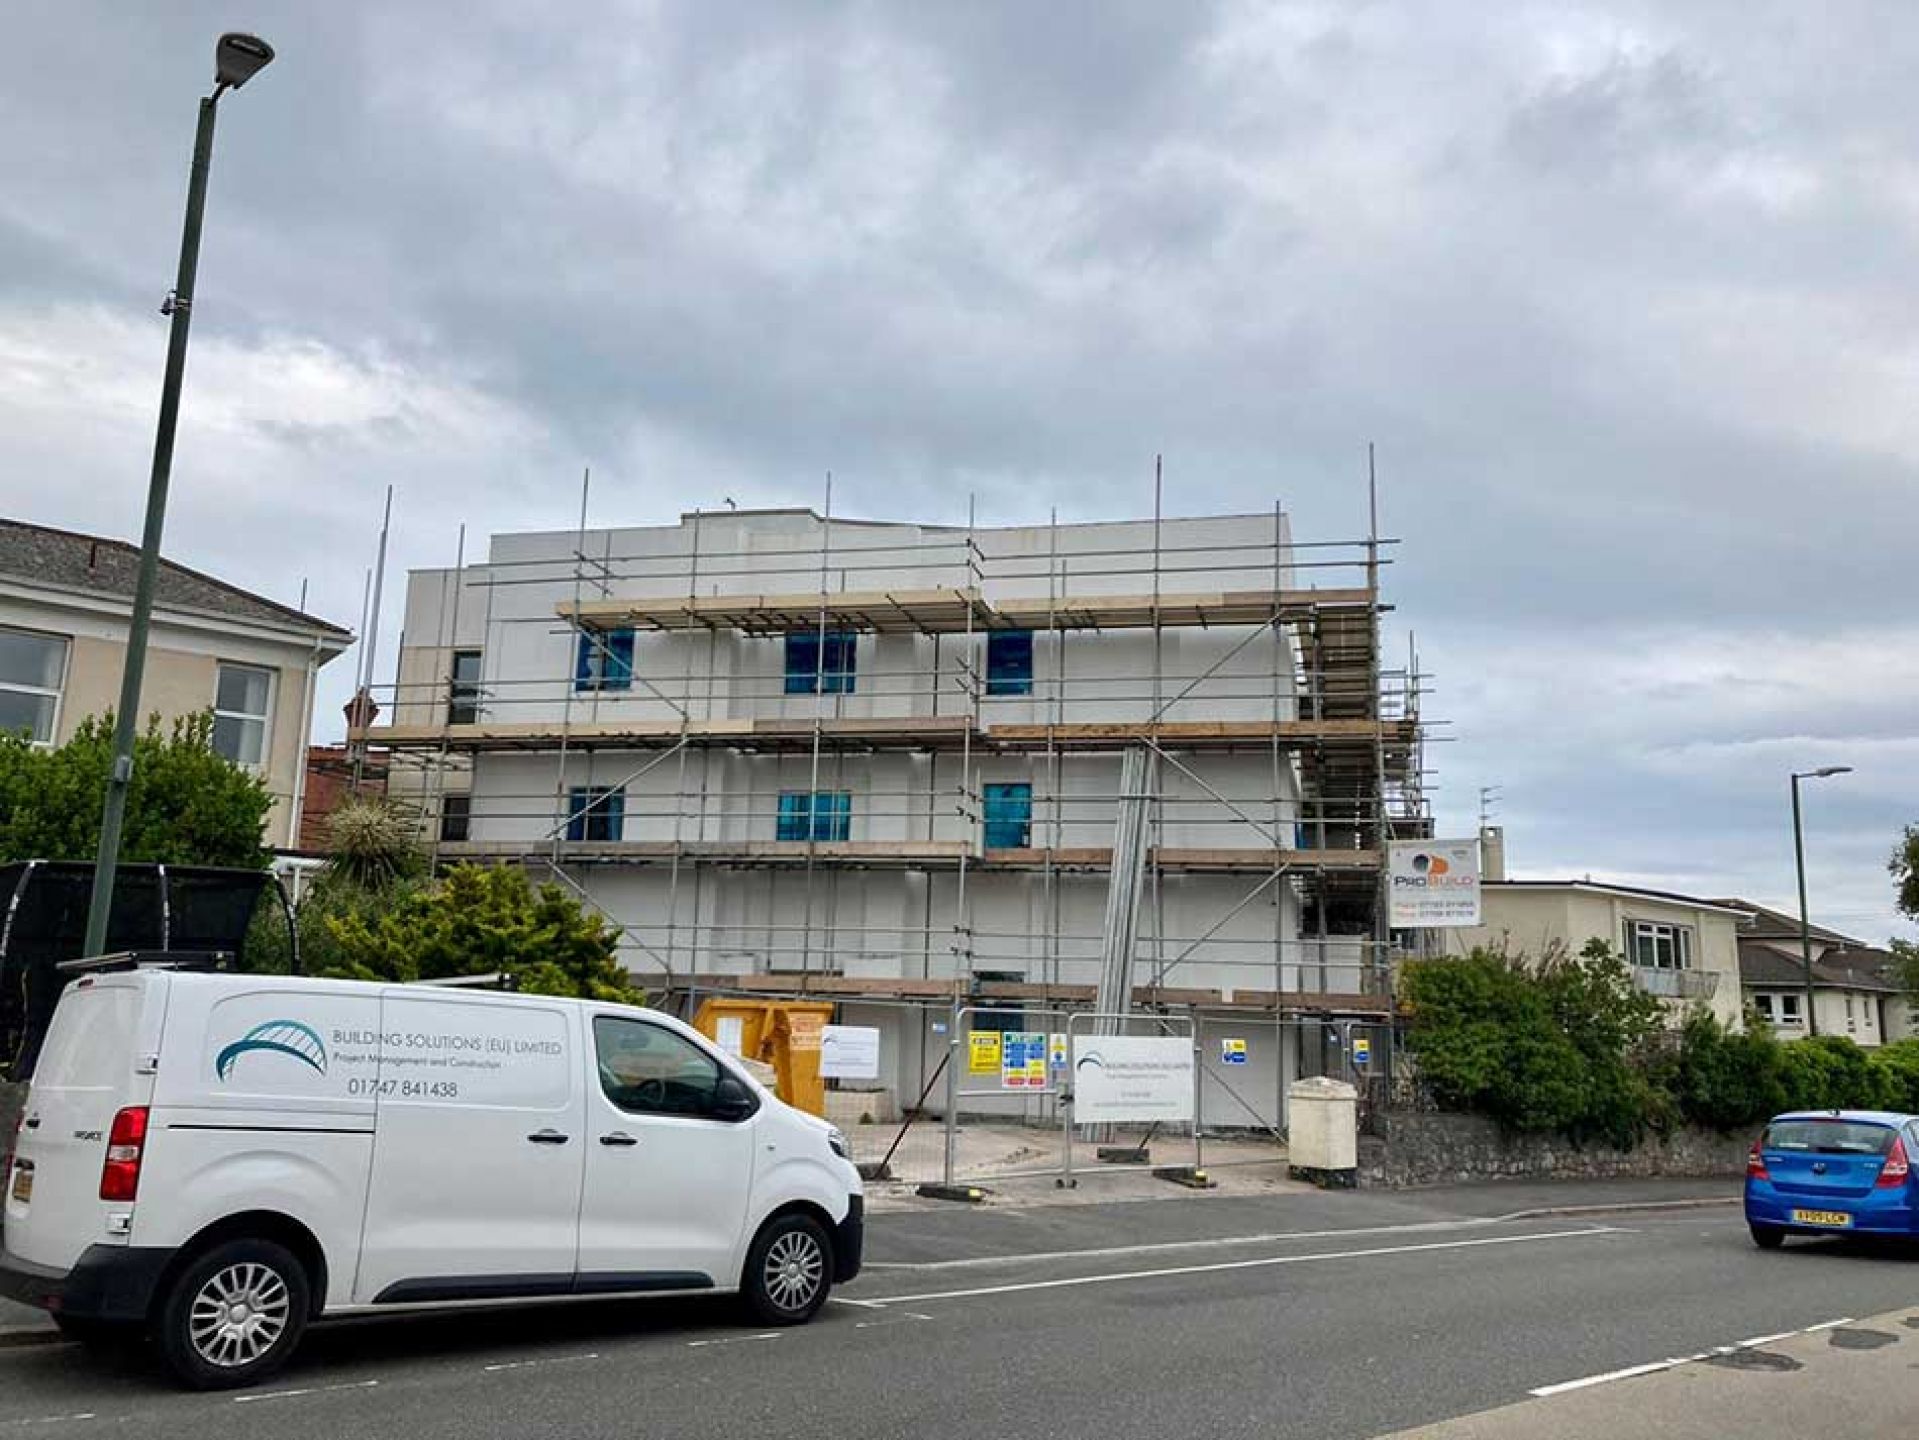 Hotel mid development with scaffolding outside and a white van with building solutions eu limited on the side.